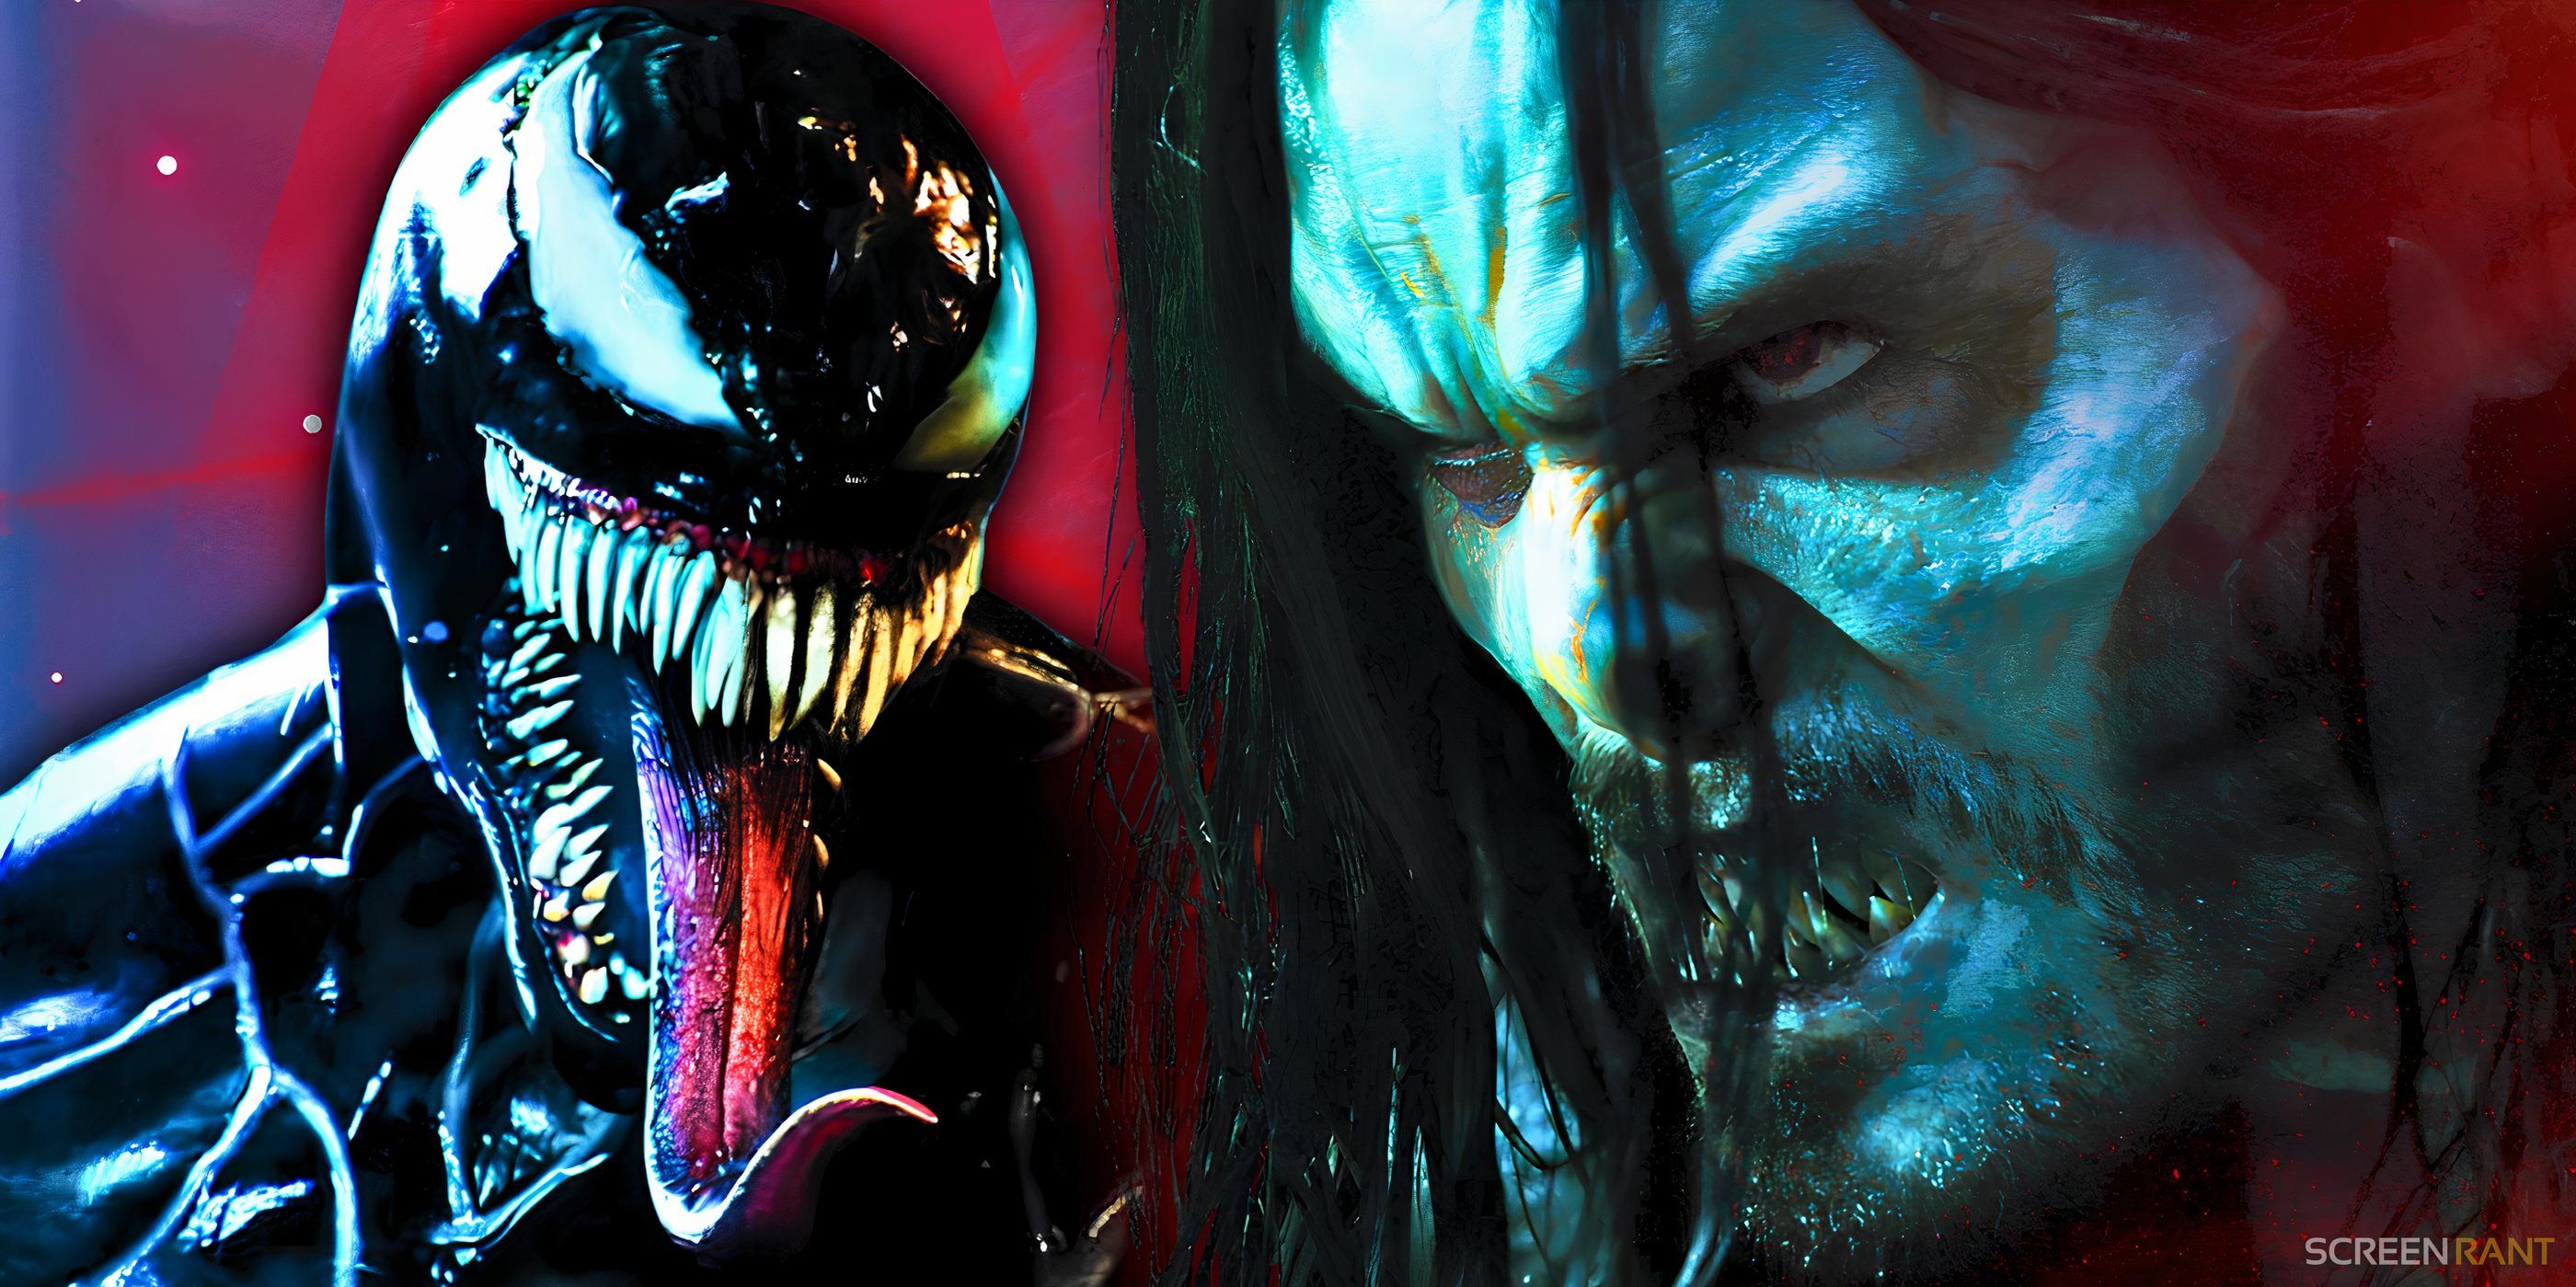 Venom with his tongue sticking out and Jared Leto's Morbius